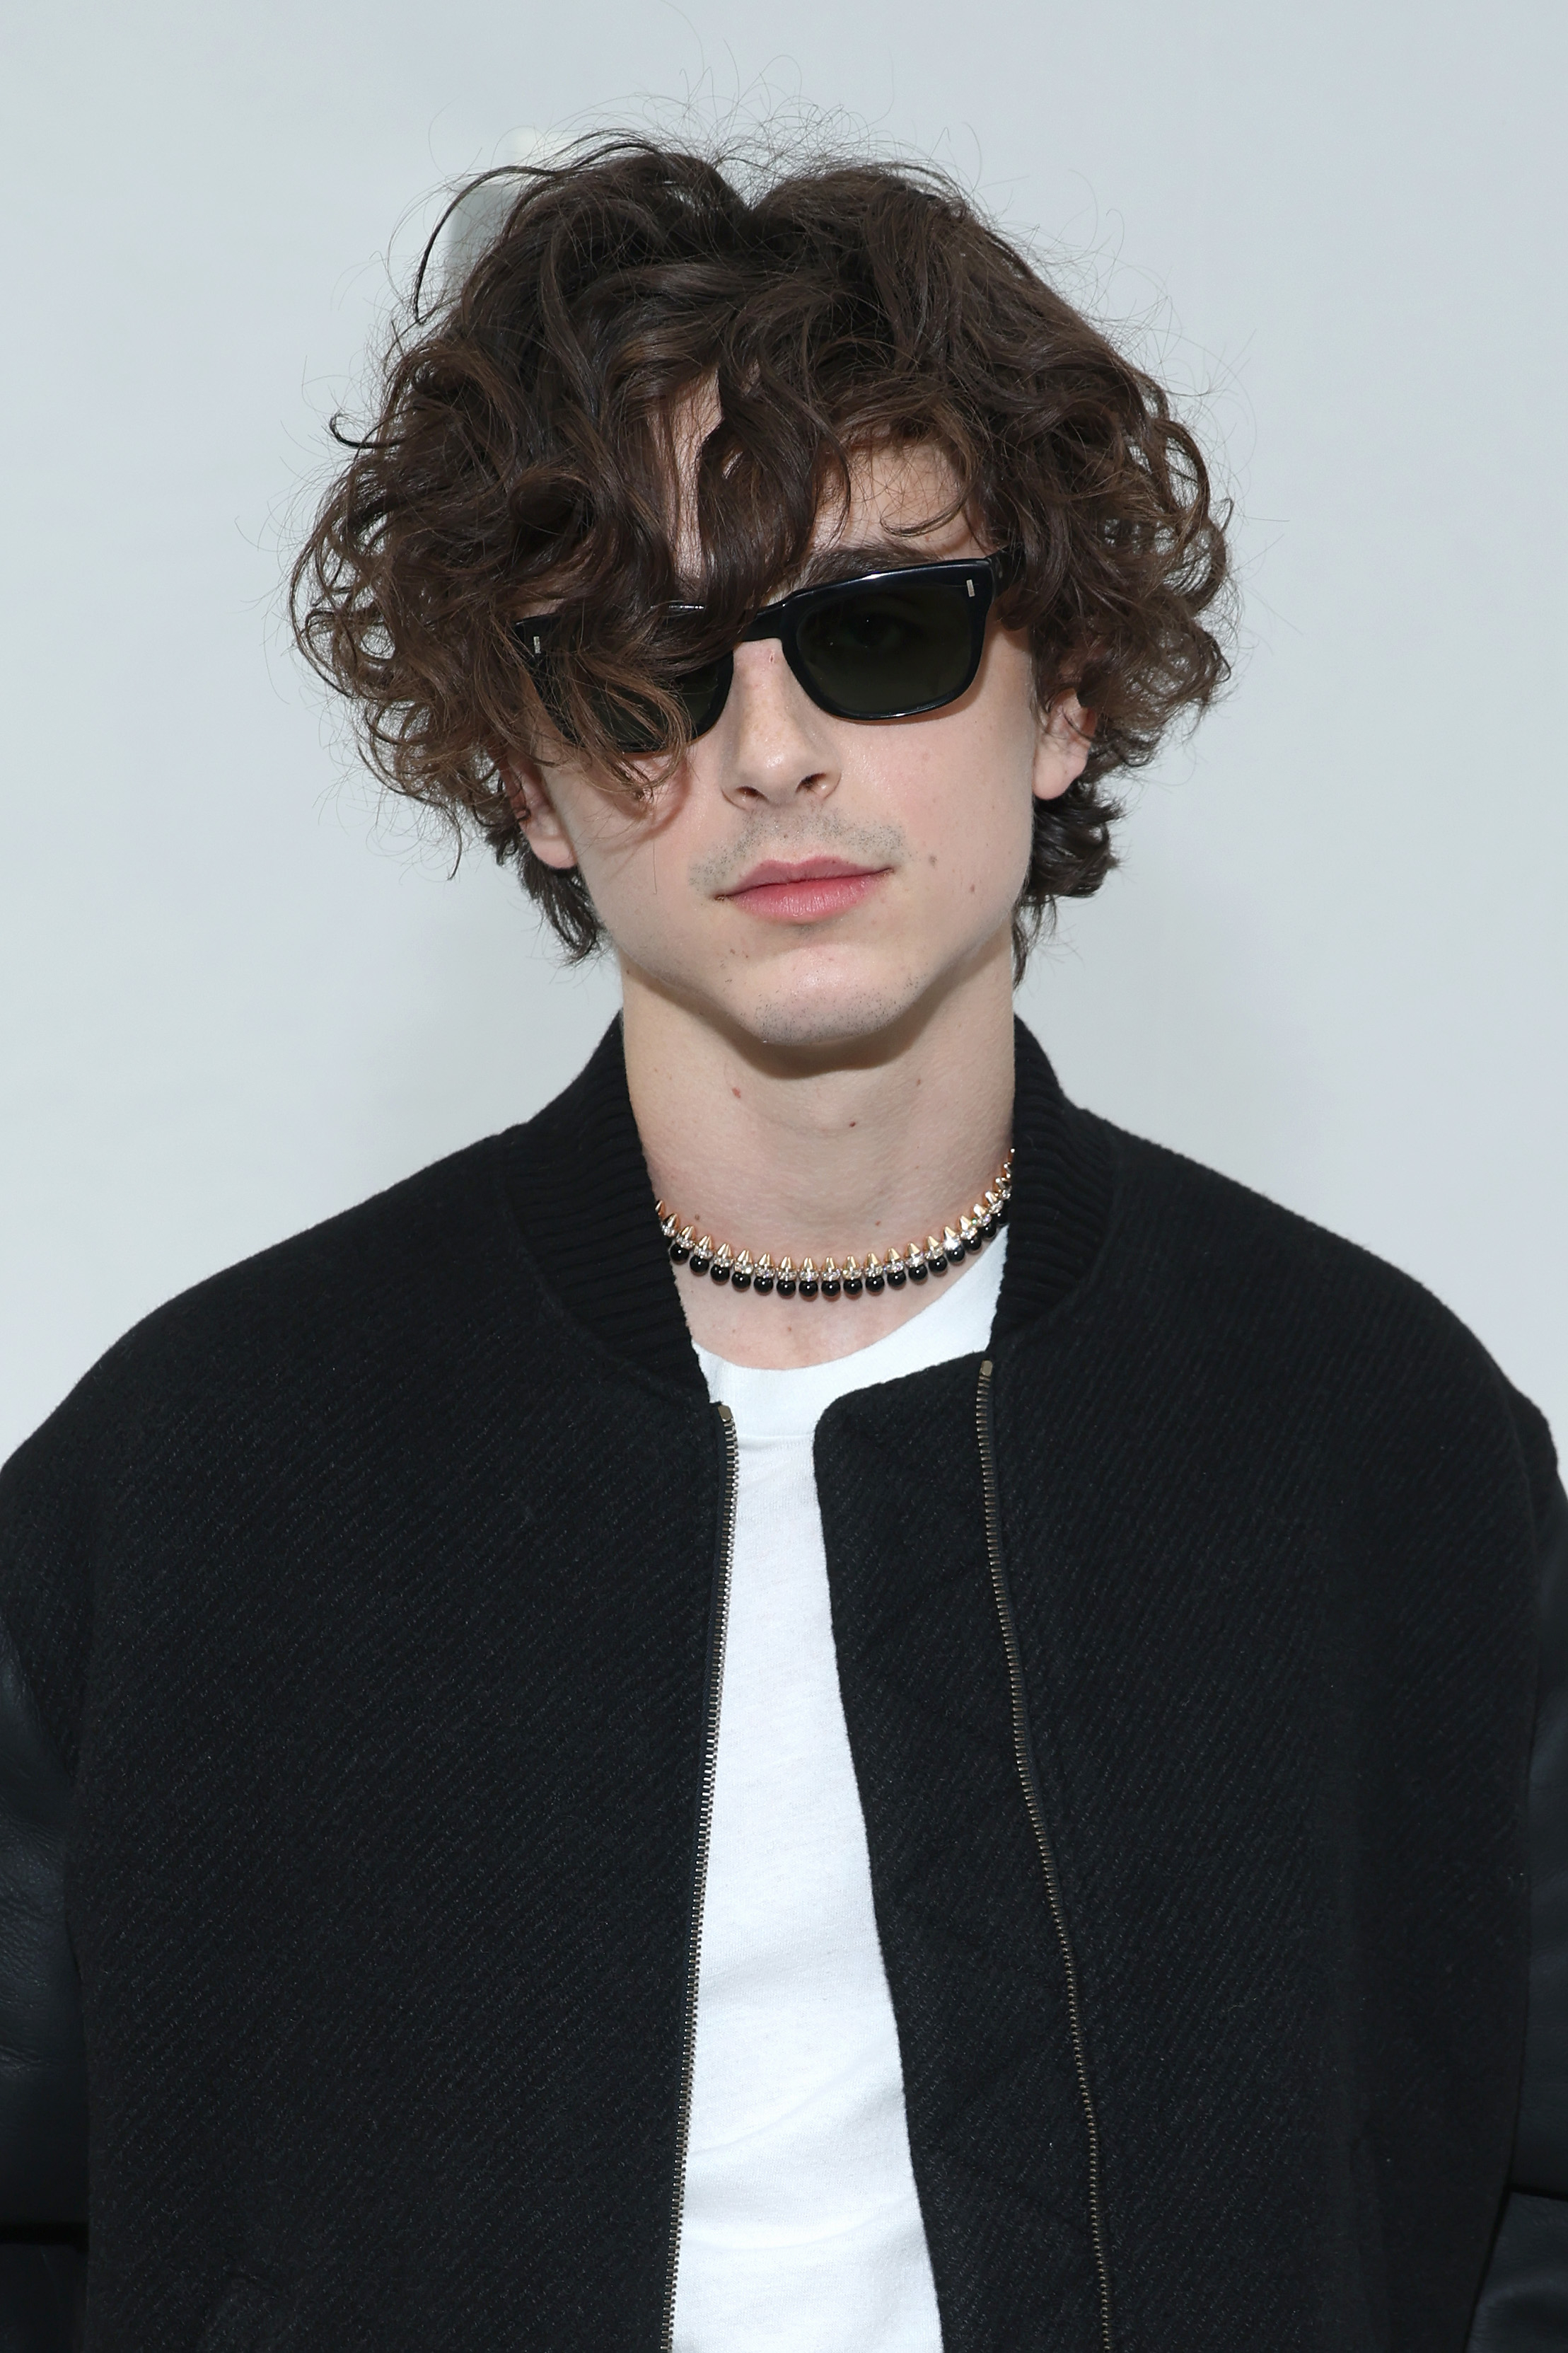 Close-up of Timothée in sunglasses